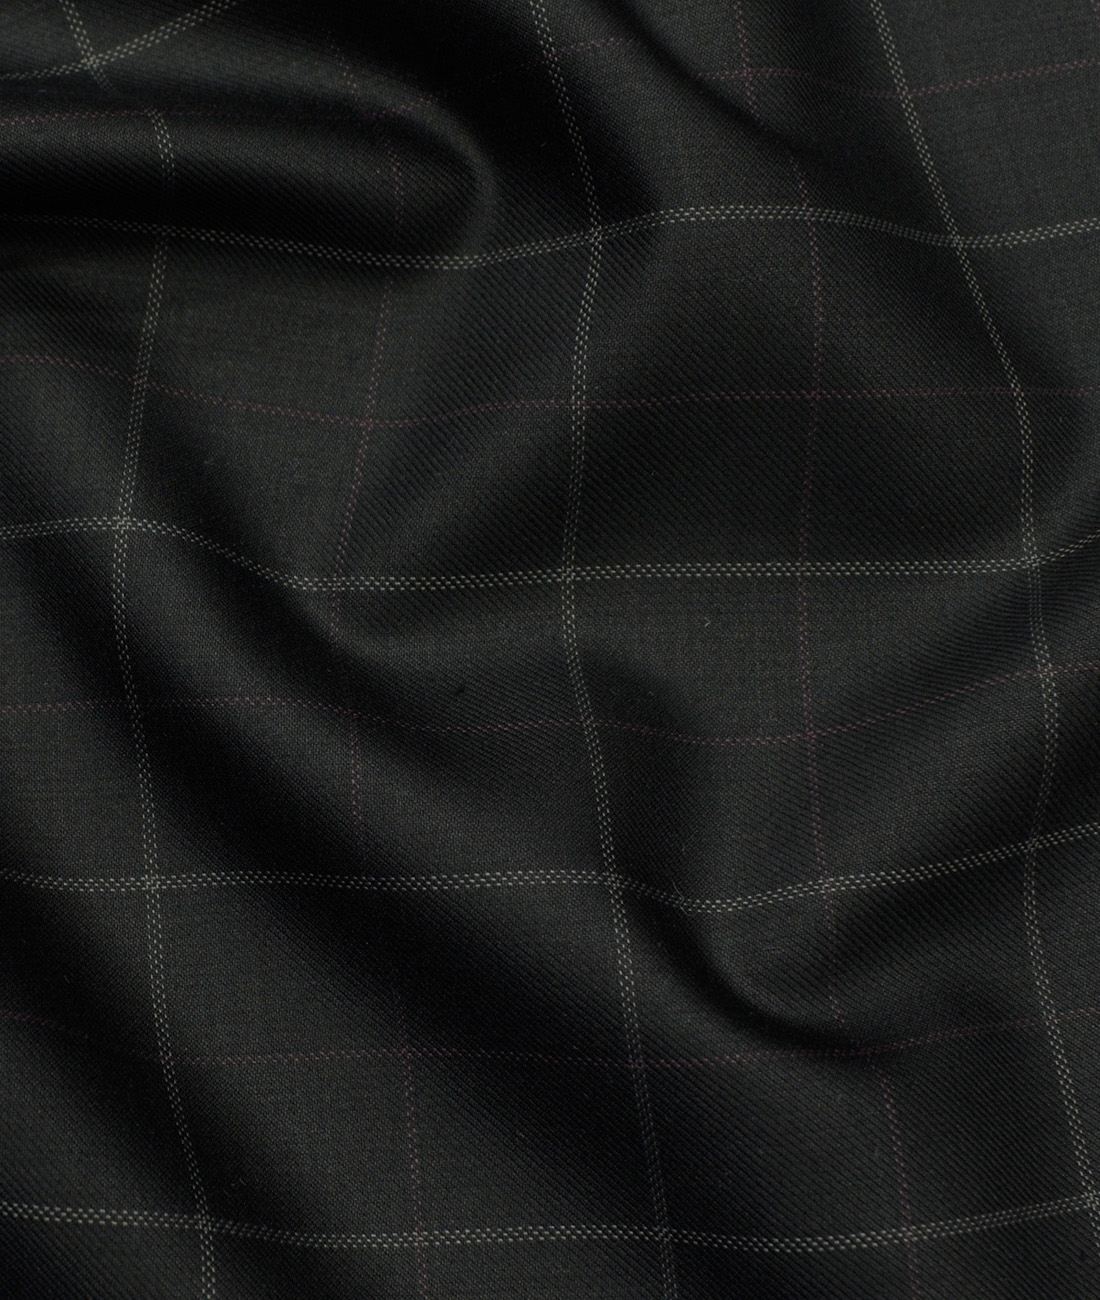 Marcellino Men's Terry Rayon Checks 3.75 Meter Unstitched Suiting Fabric (Black)